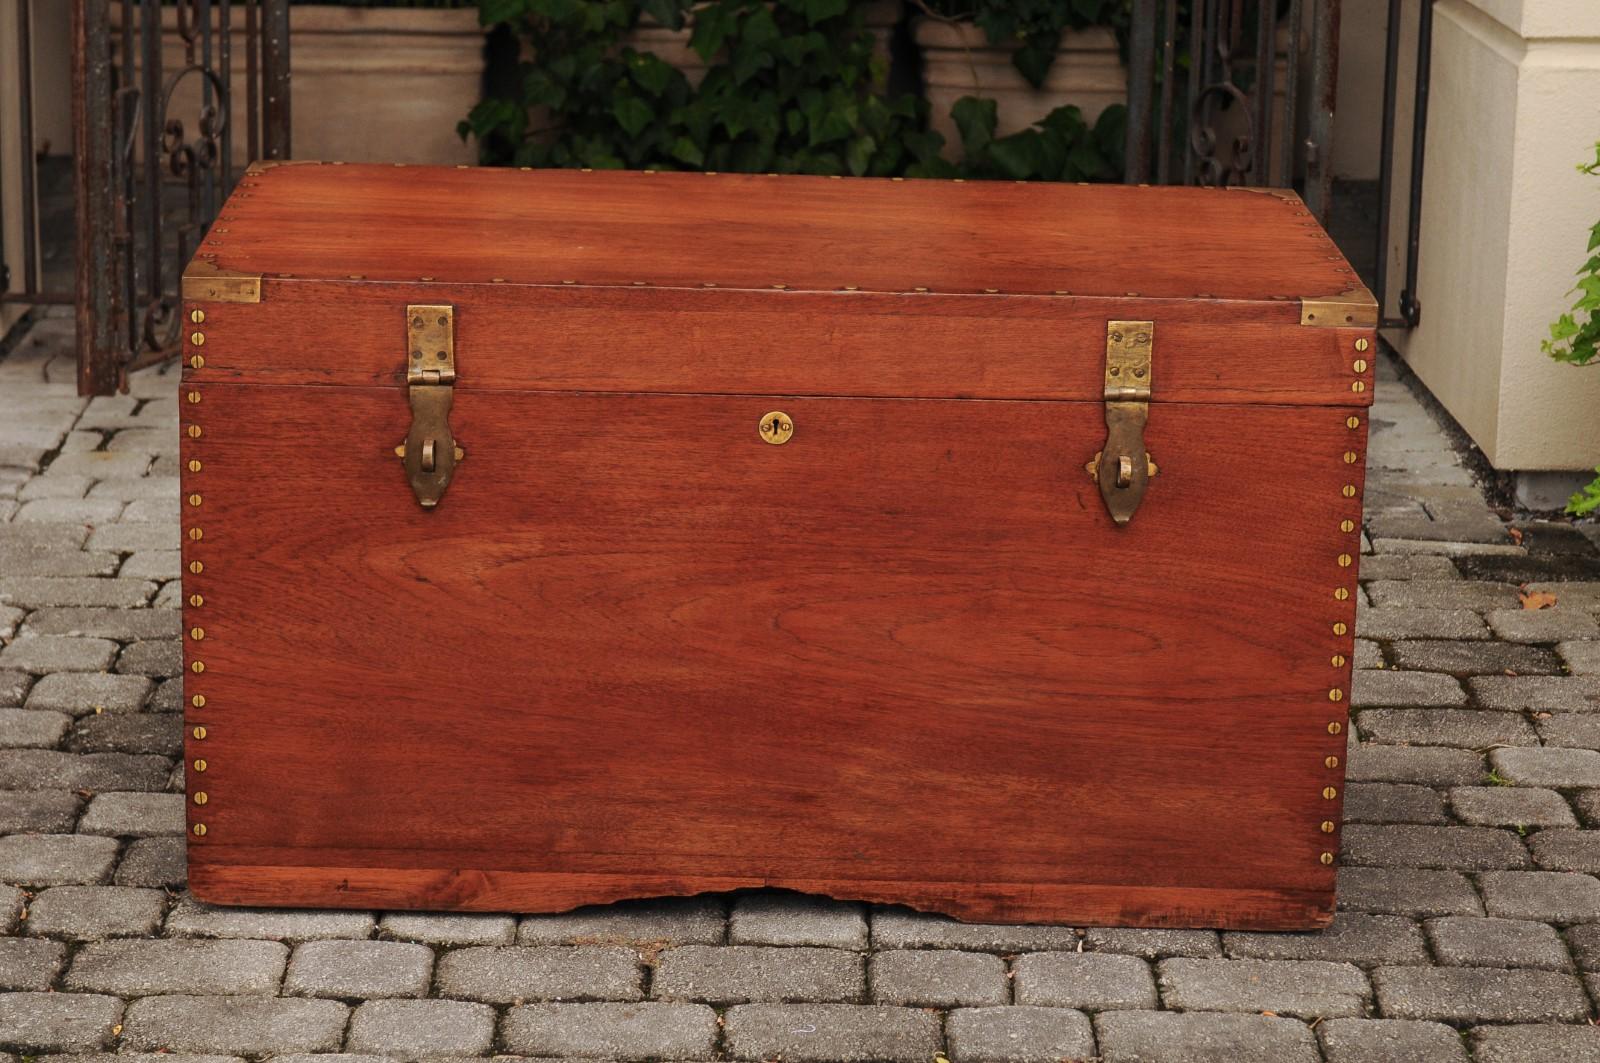 An Anglo-Indian teak trunk from the late 19th century, with multiple storage compartments and brass accents. Born in the later years of the 19th century, this exquisite teak wood trunk features a linear silhouette, beautifully accented with brass